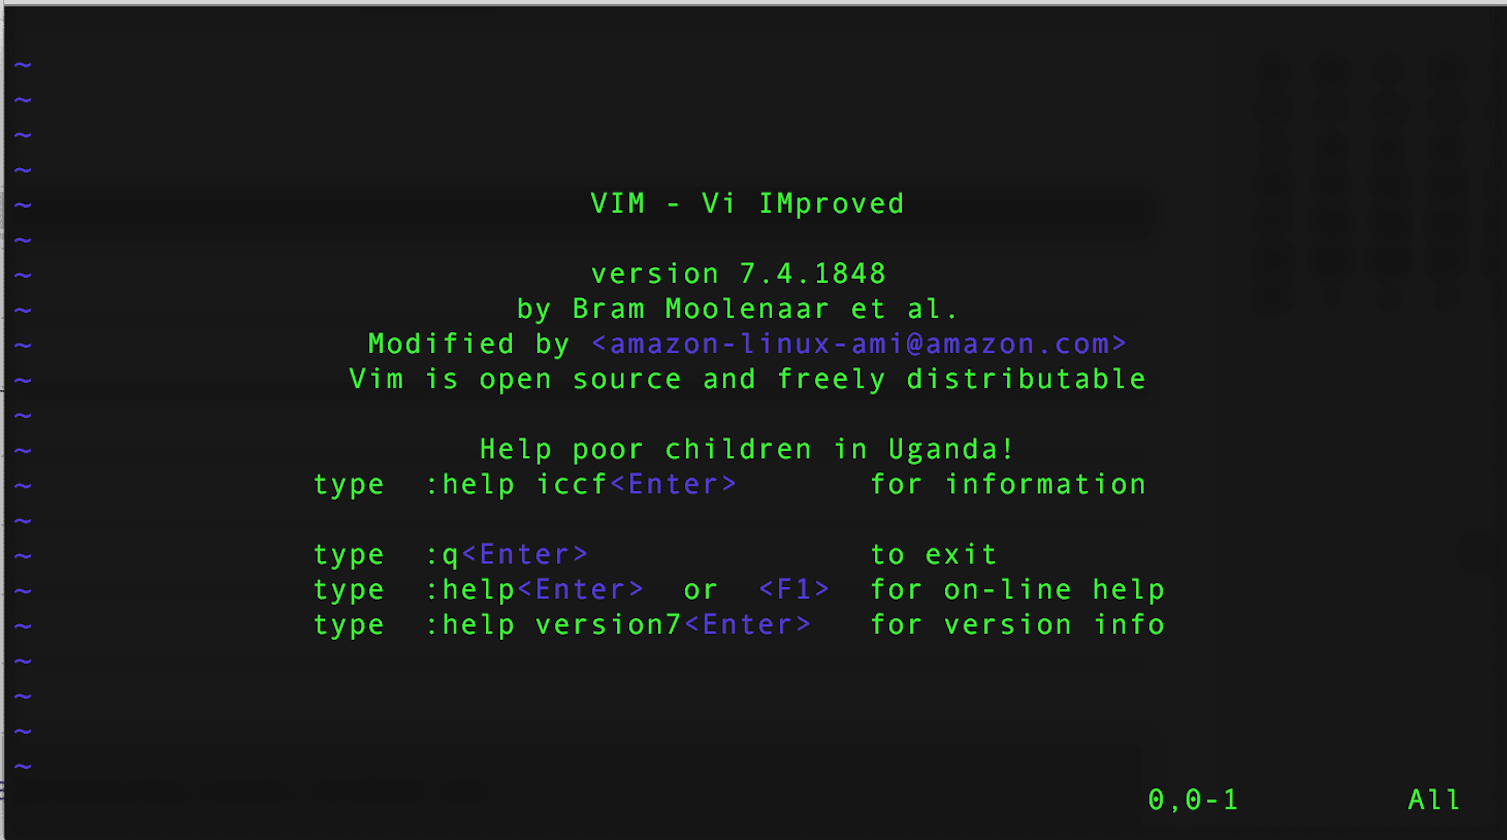 Getting Started With Vim (vi improved)